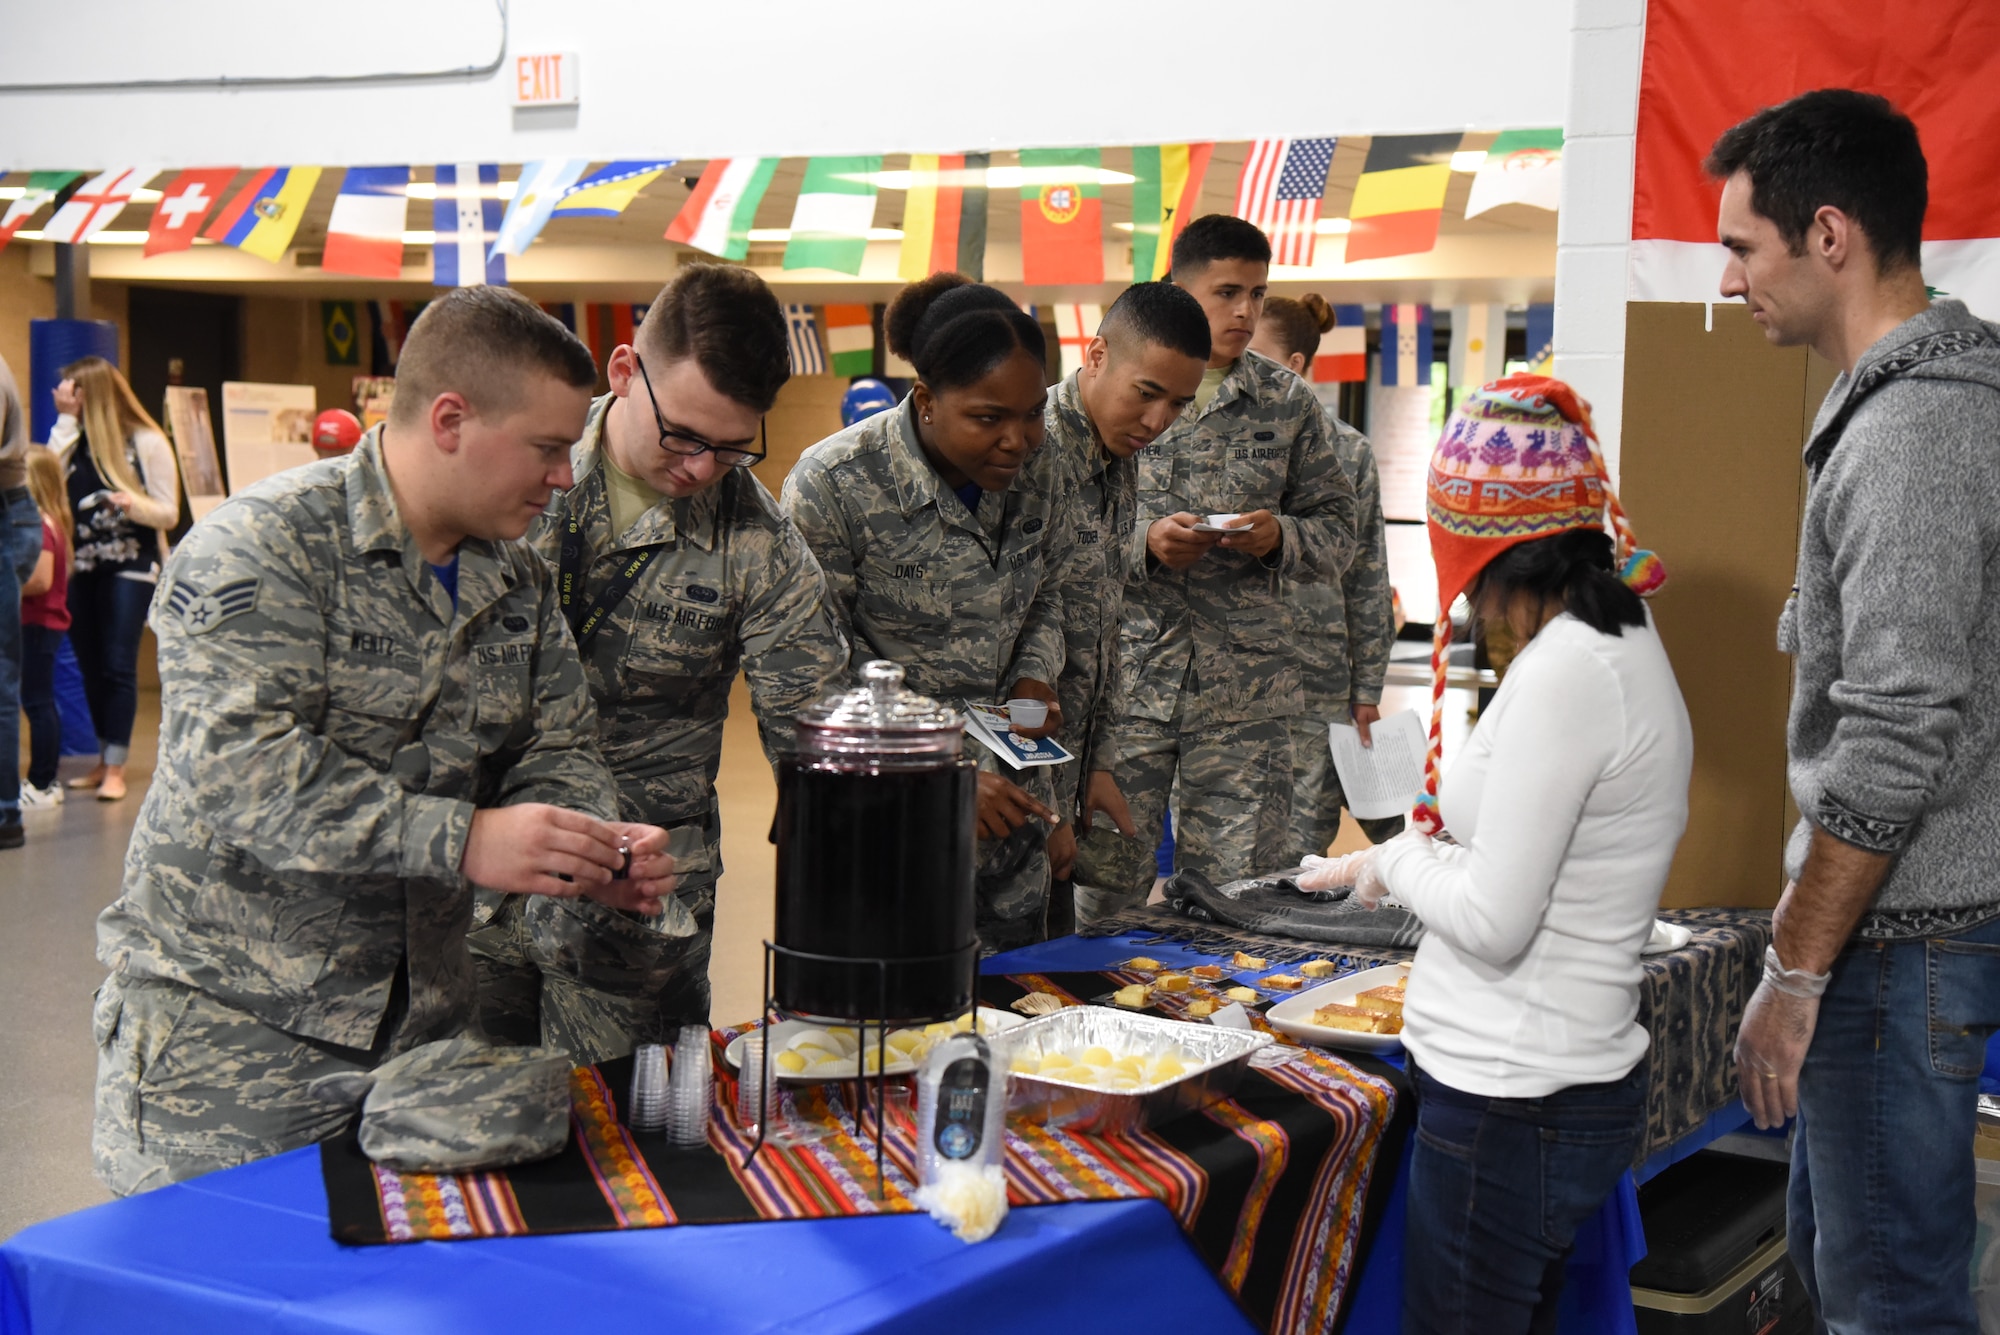 Airmen gather to sample food at the multicultural expo June 20, 2018, at Grand Forks Air Force Base, North Dakota. Each booth had a dish from their respective culture, so that base residents could try out different tastes from all over the world. (U.S. Air Force photo by Airman 1st Class Melody Wolff)